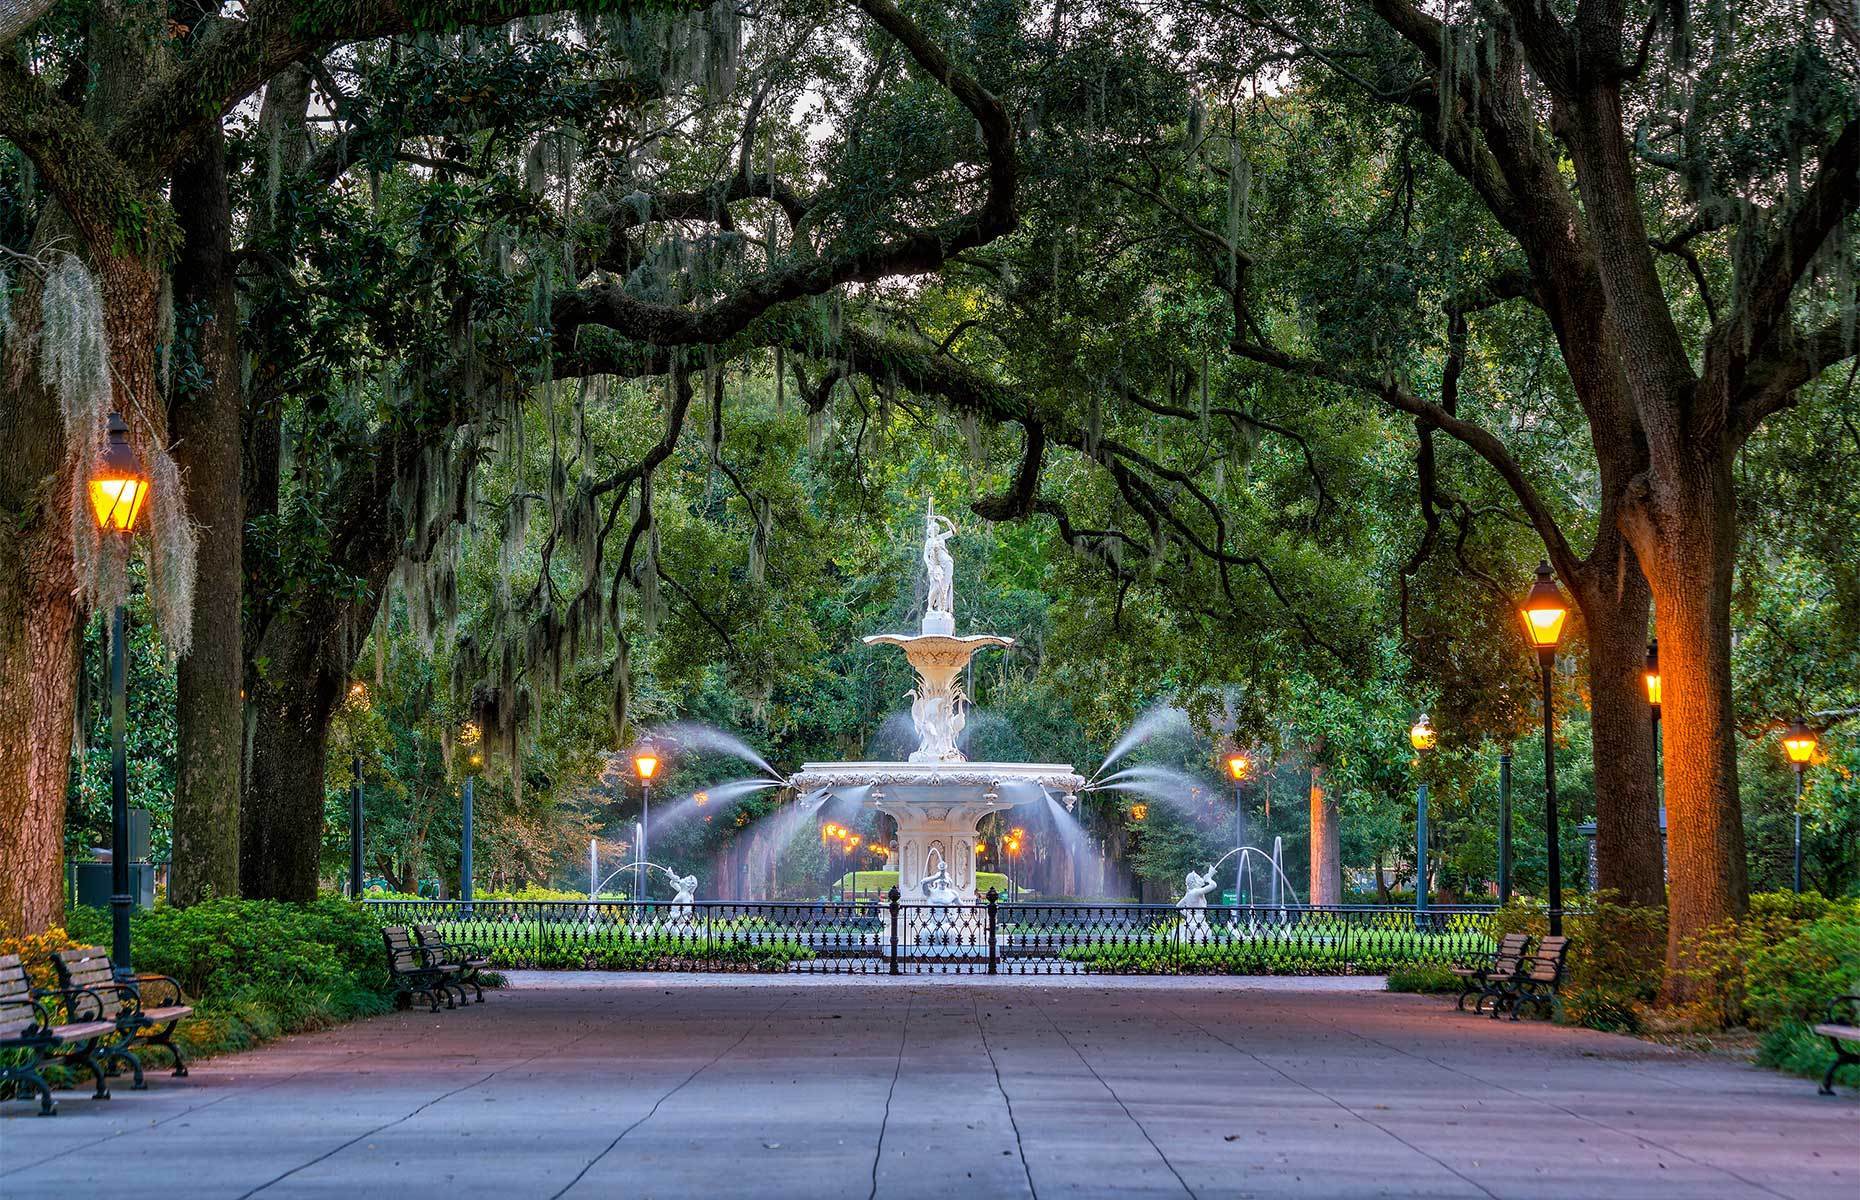 <p class="p1"><span>Nothing will bring out the romantic in you like a stroll down the impressive tree-lined paths in<a href="https://www.visitsavannah.com/profile/forsyth-park/6094" rel="noreferrer noopener"><span> Forsyth Park</span></a>, one of Savannah’s oldest public parks.</span></p>